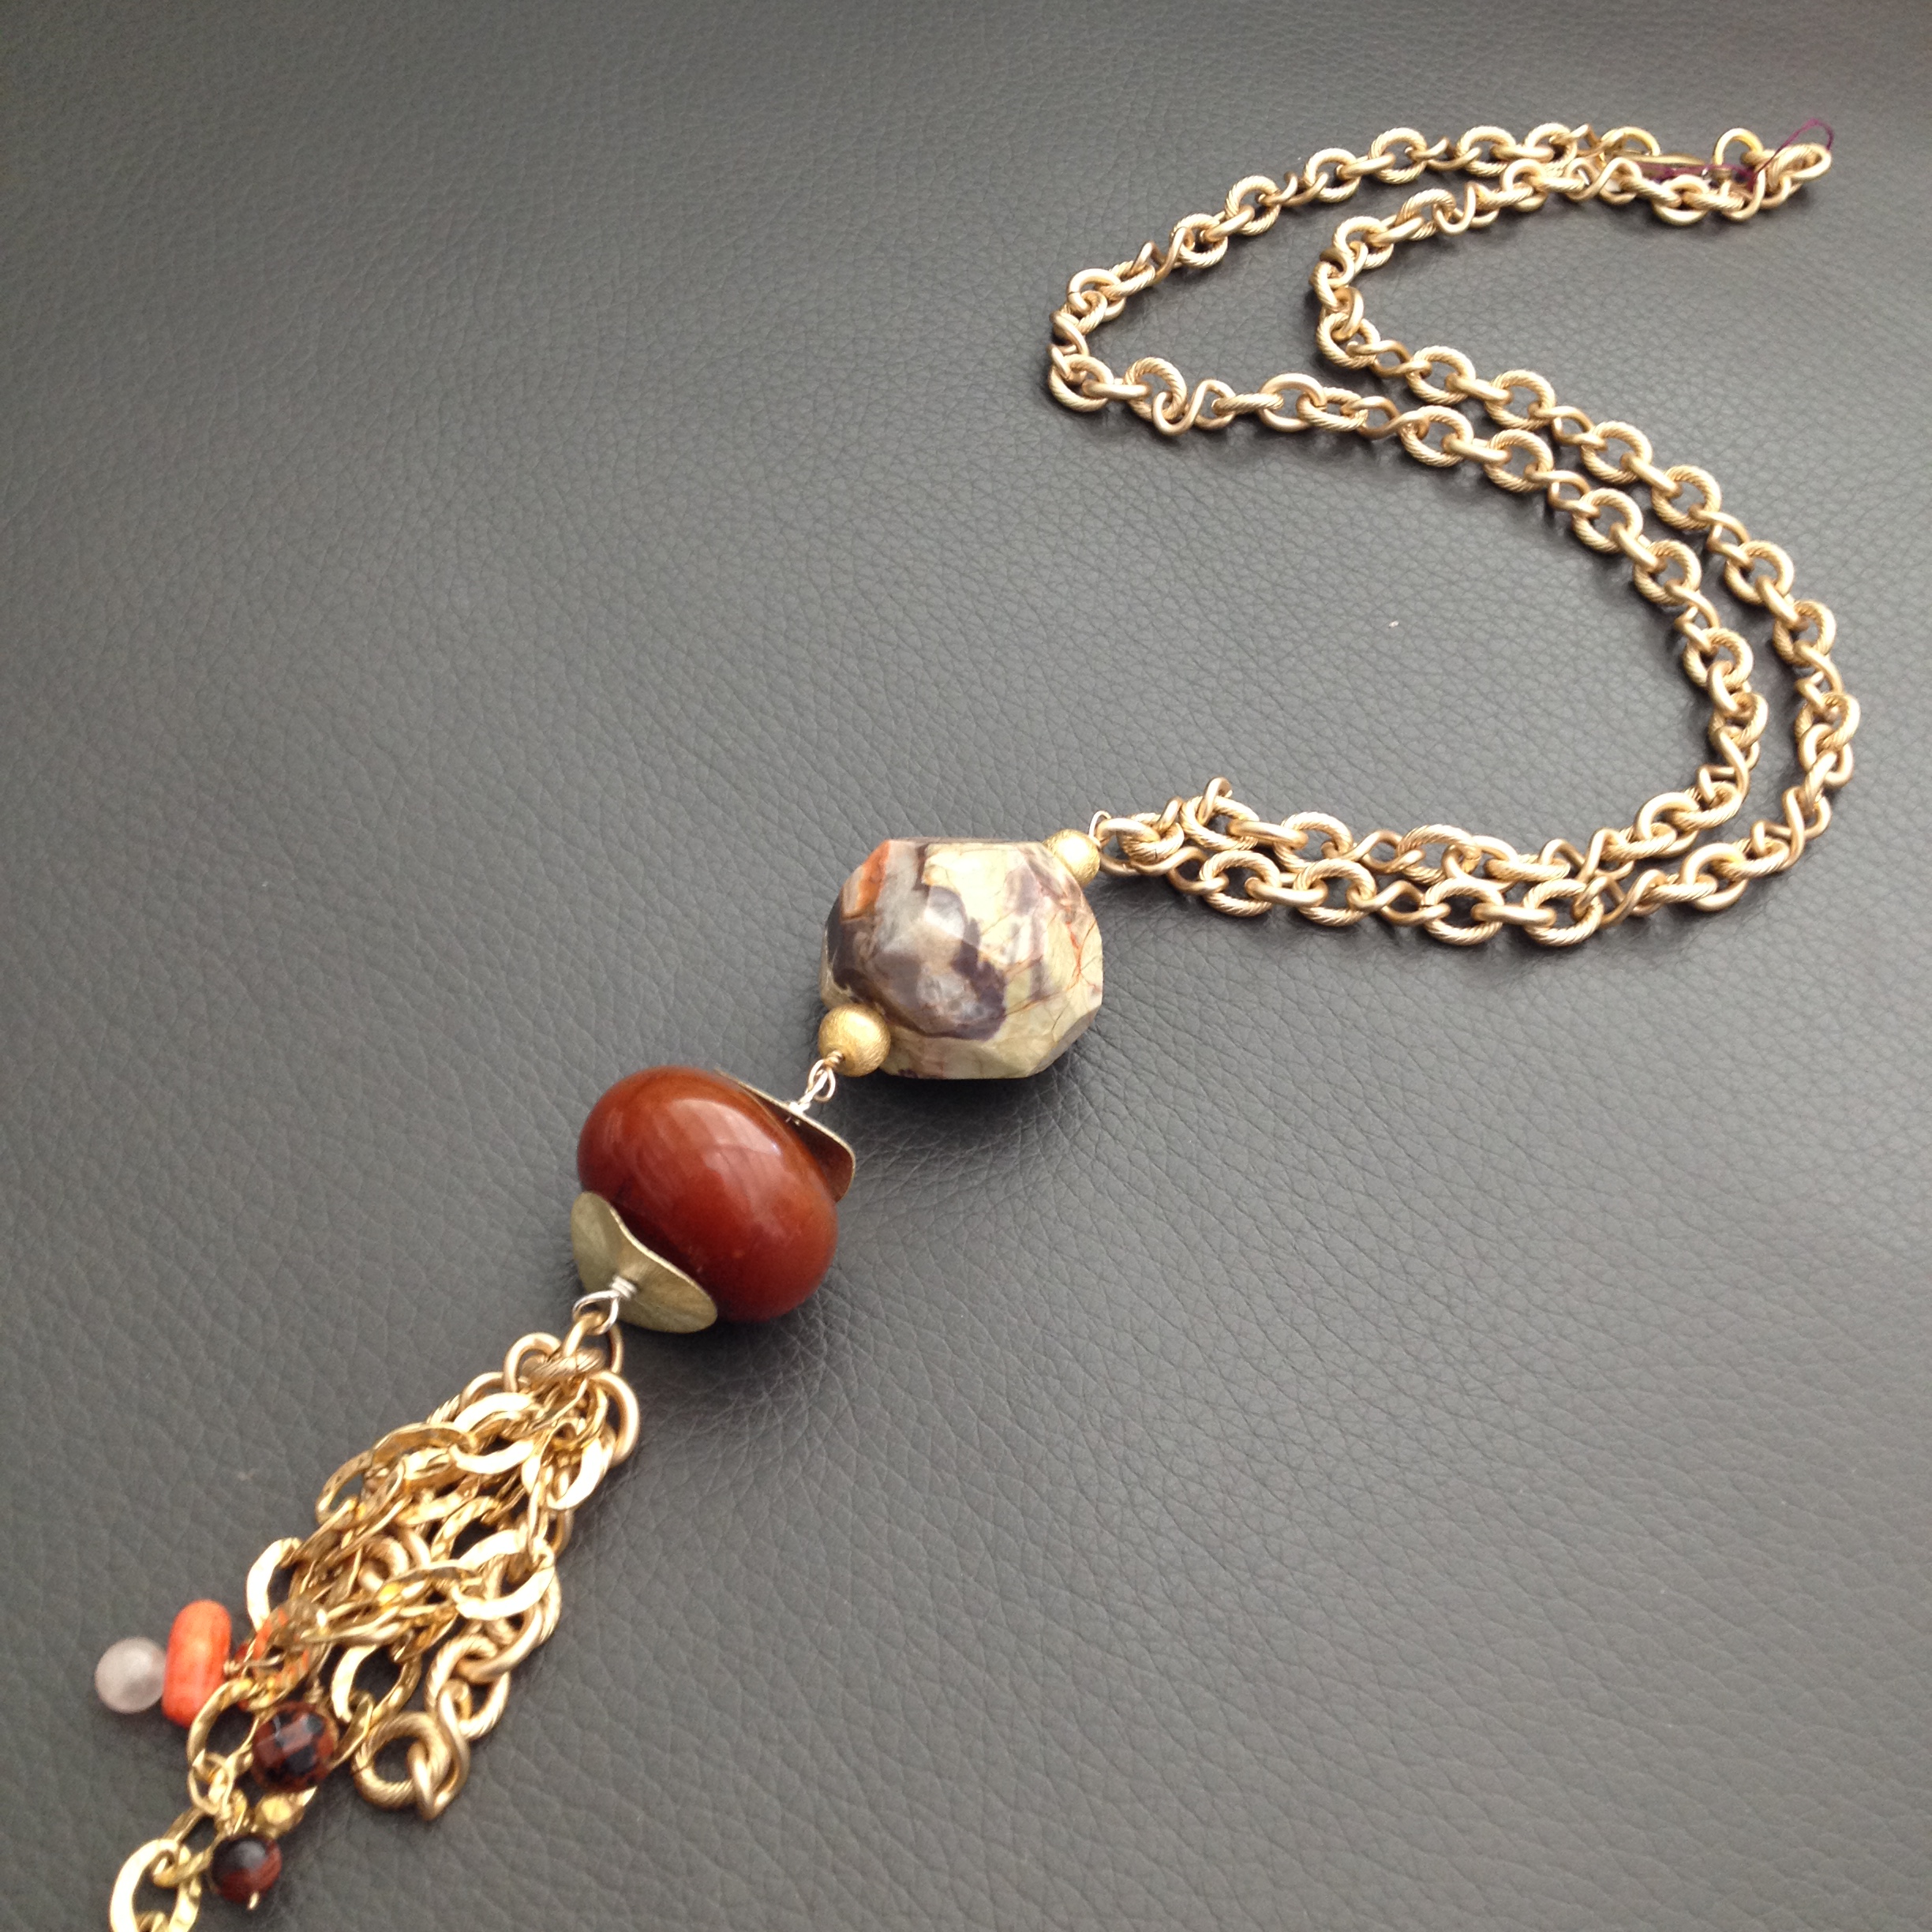 Agate and chain tassel necklace #jewelry #necklace #phyllisclark